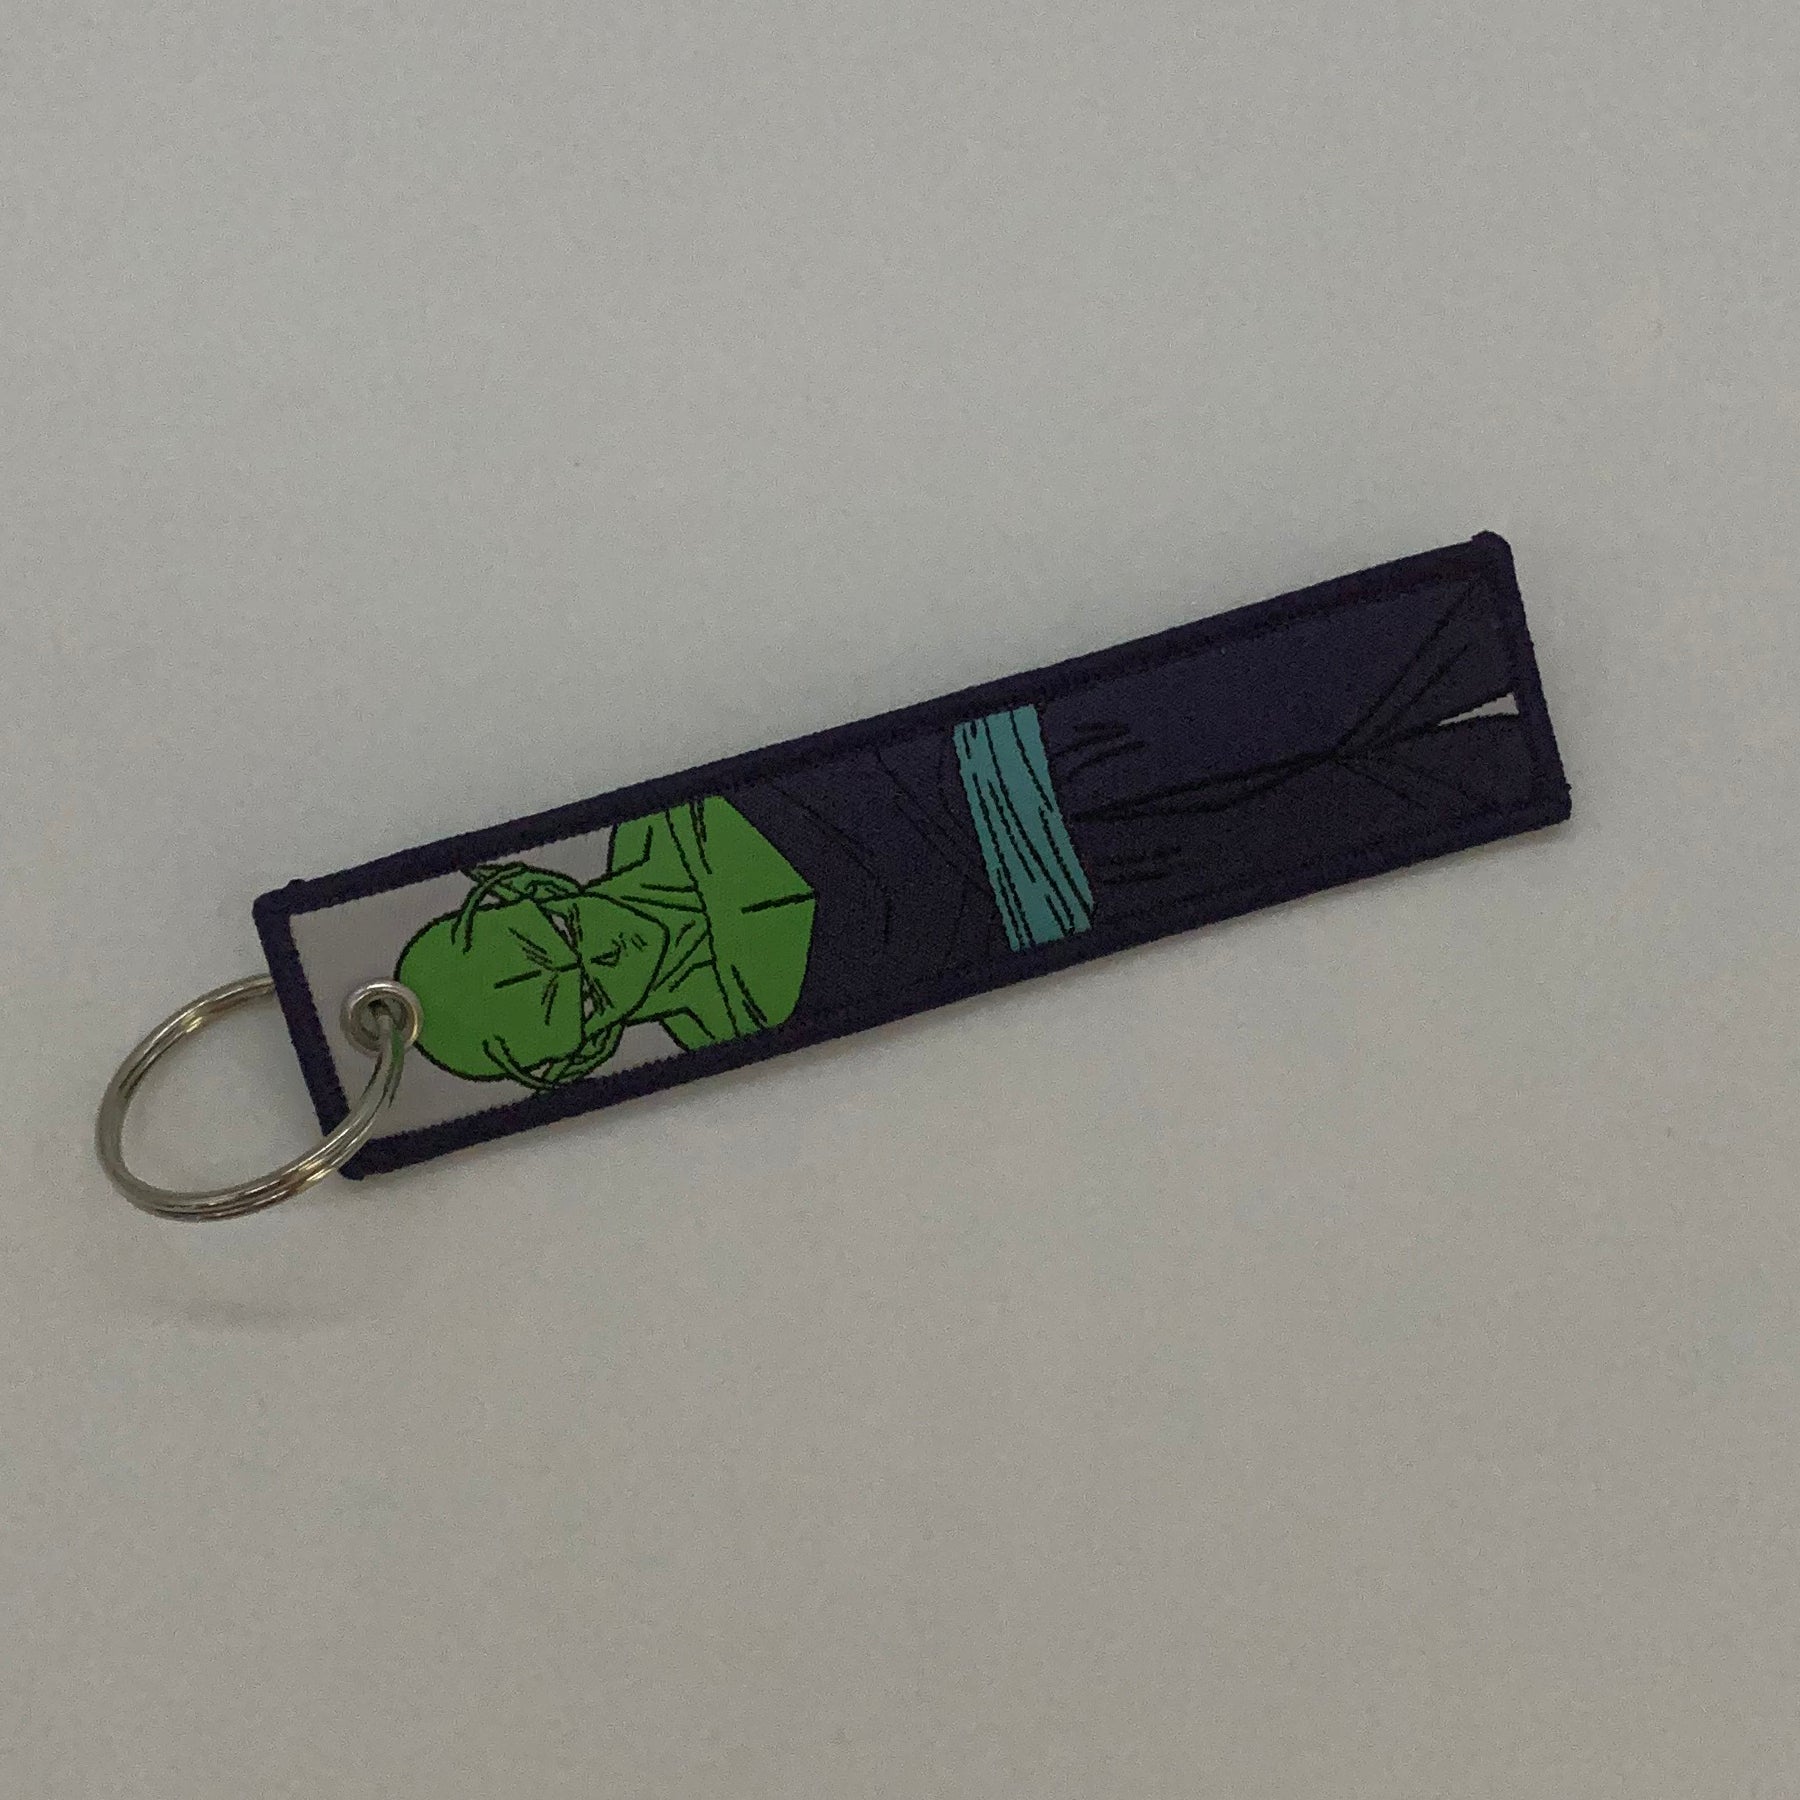 LIMITED Dragonball Piccolo EMBROIDERED KEY CHAIN